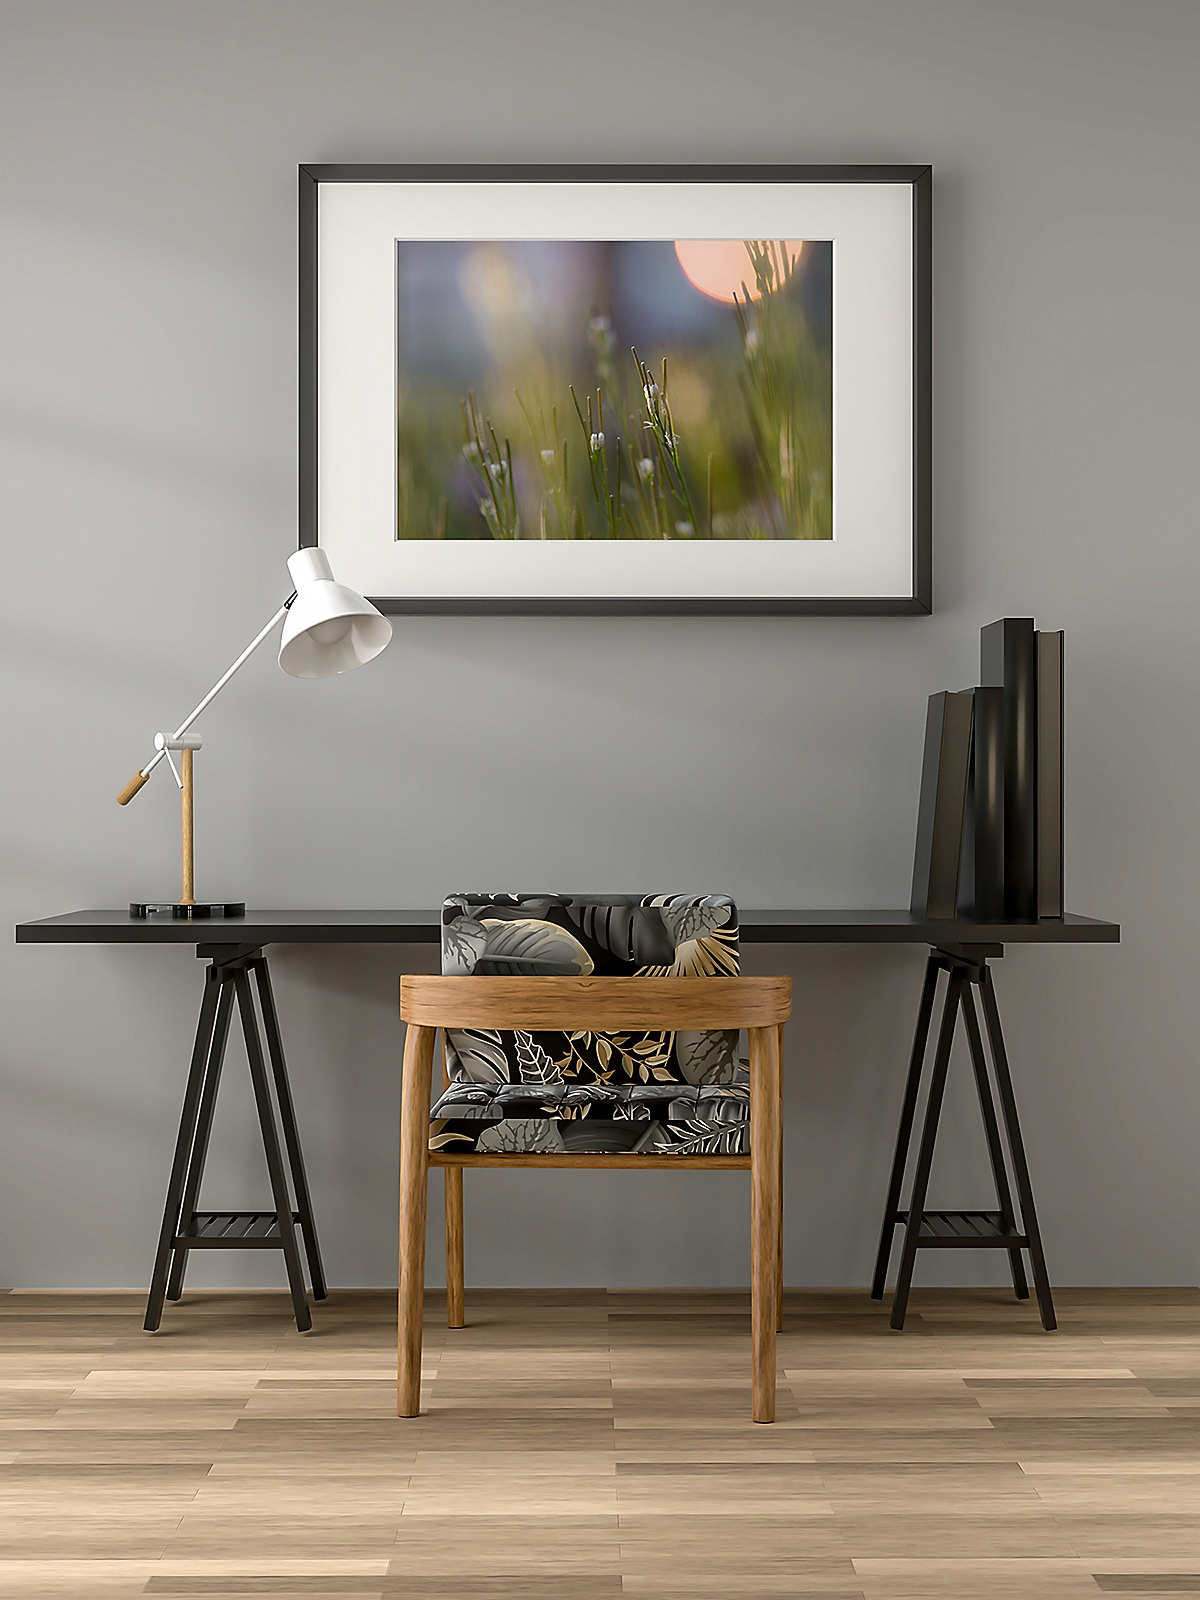 Multiple Cardamine pratensis flowers in a grassy field under a setting sun in the right corner, with purple hues in the sky, framed in a black frame with white mount, hanging on a grey colored wall, with a black office table underneath and a luxurious patterned chair.